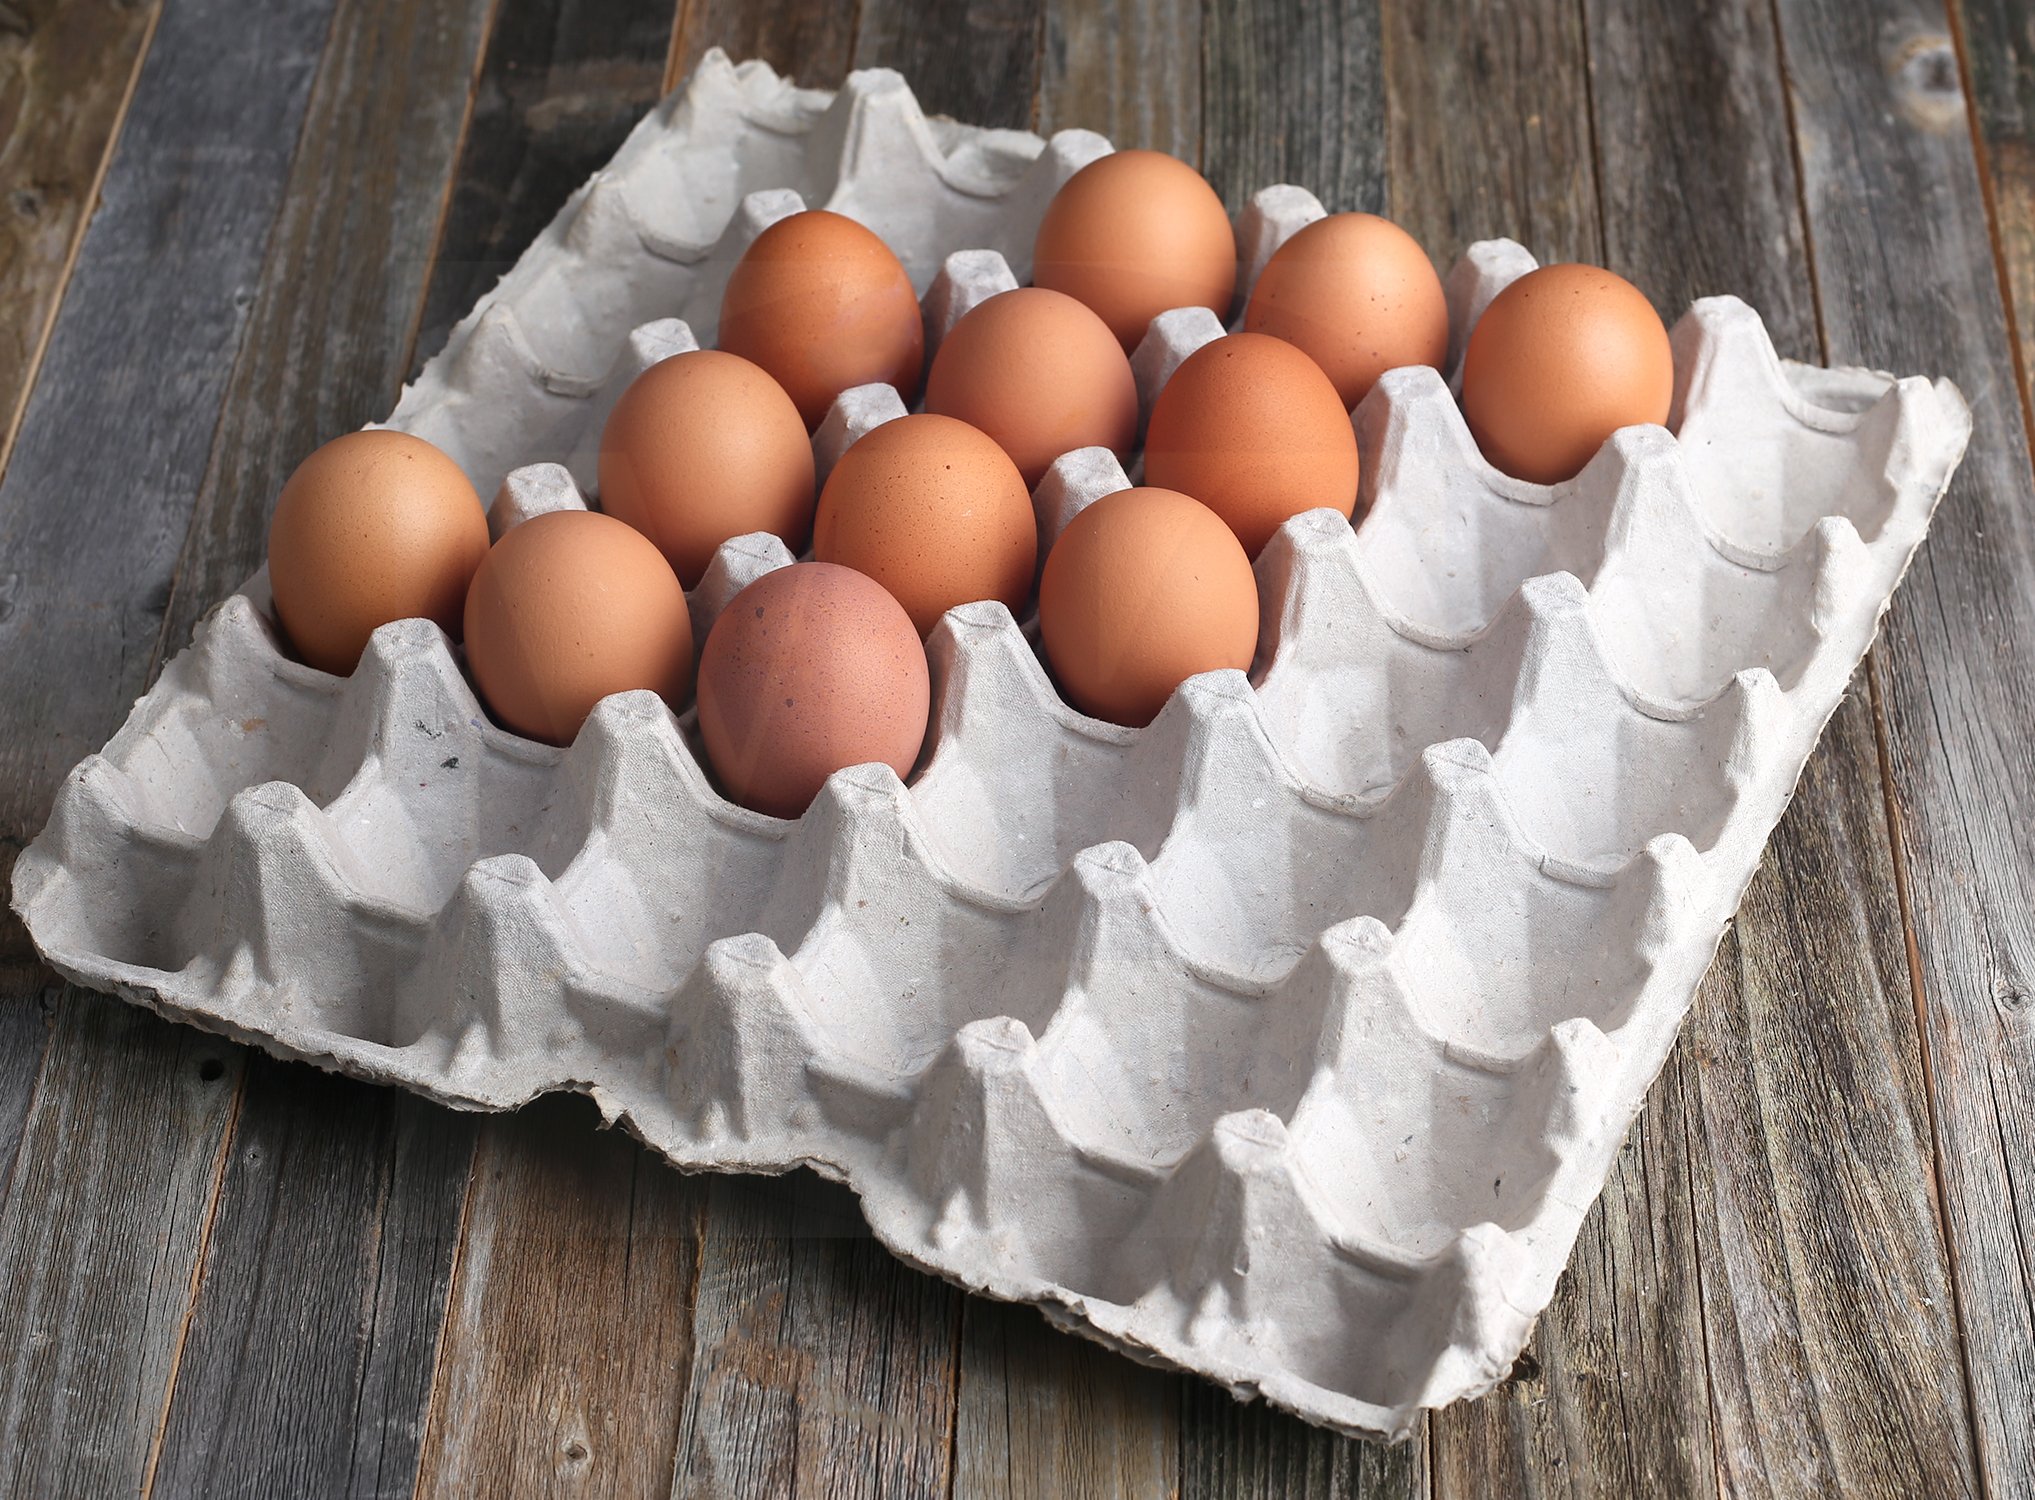 Blank Natural Pulp Egg Cartons Holds Up to Twelve Eggs - 1 Dozen (25 Pieces) and Biodegradable Pulp Fiber Egg Flats for Storing up to 30 Large or Small Eggs (15 Pieces) by MT Products